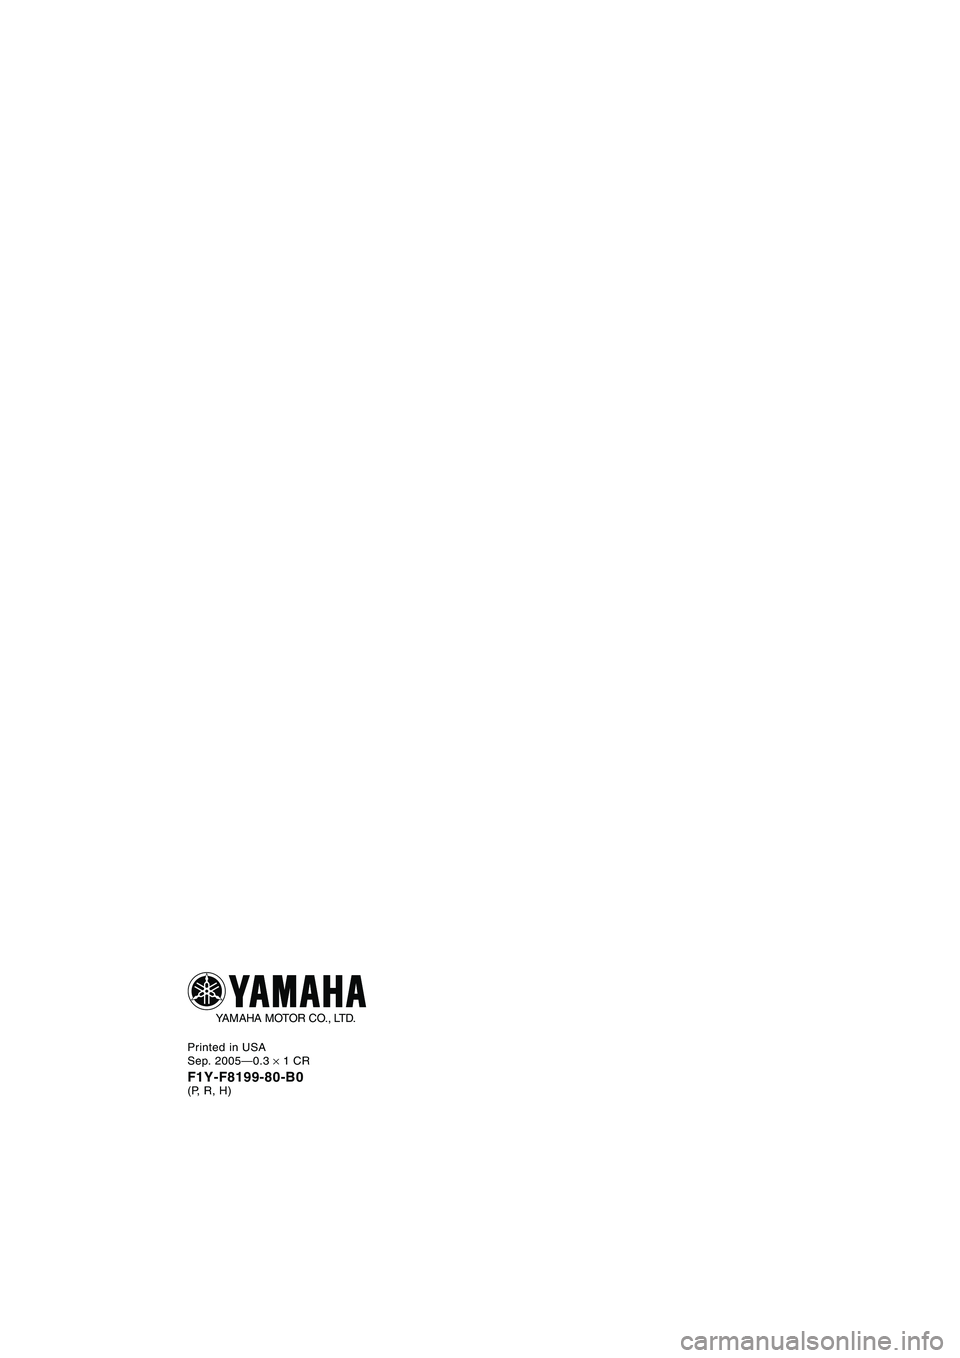 YAMAHA FX CRUISER 2006  Manuale duso (in Italian) Printed in USA
Sep. 2005—0.3 × 1 CR
F1Y-F8199-80-B0(P, R, H)
YAMAHA MOTOR CO., LTD.
B_F1Y80.book  Page 1  Friday, September 2, 2005  3:28 PM 